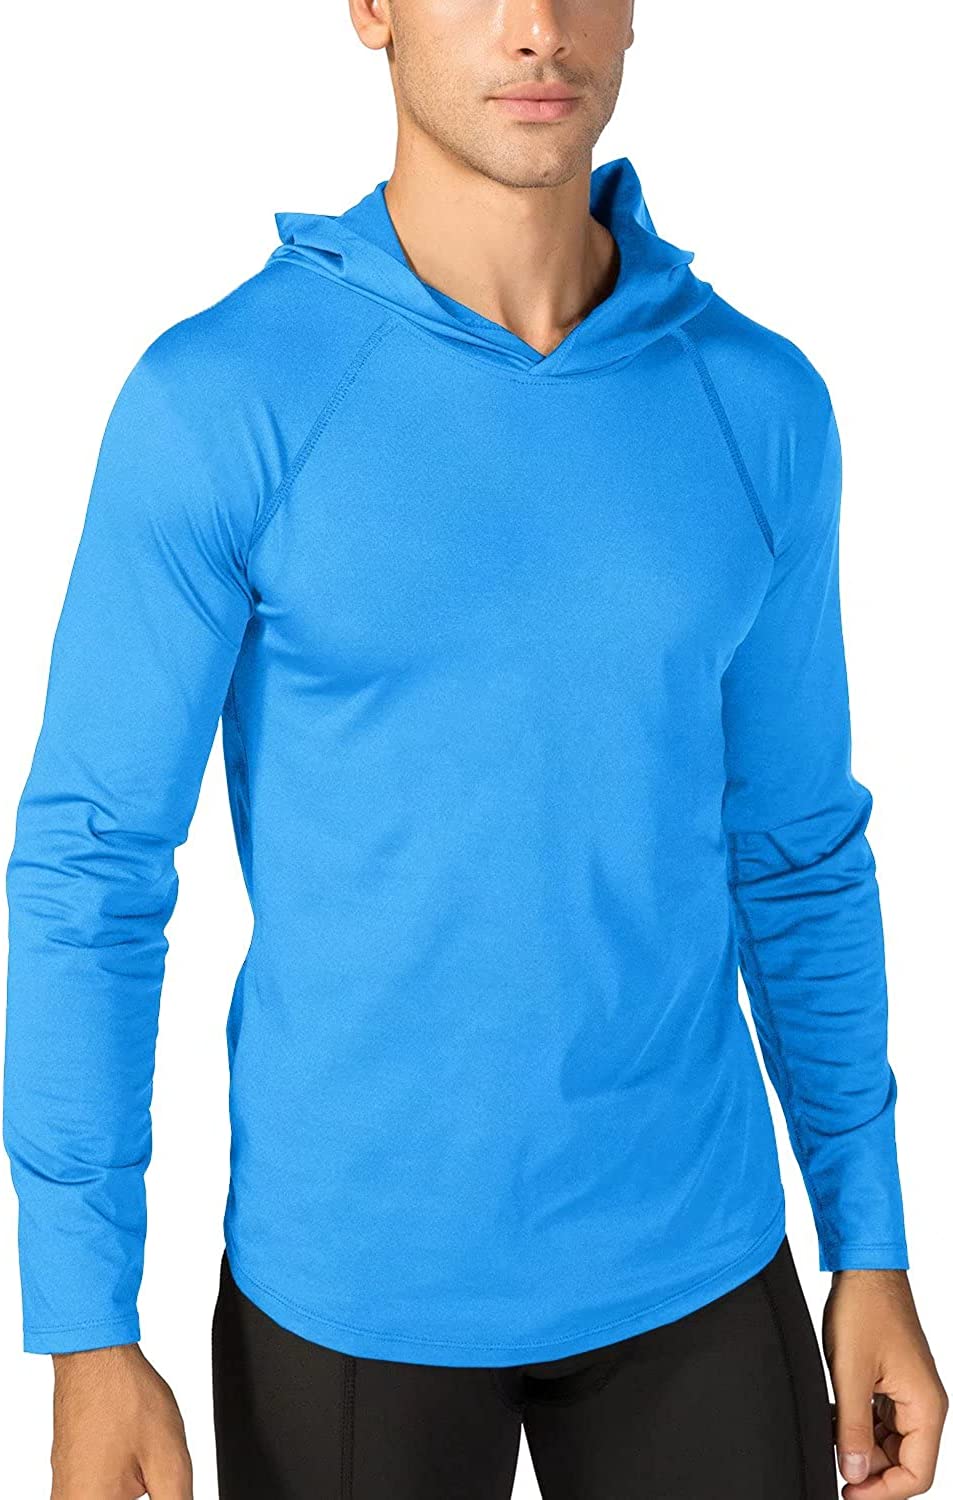 Where can I get a hooded shirt? - The Gear Shed - The Hiking South Africa  Forum